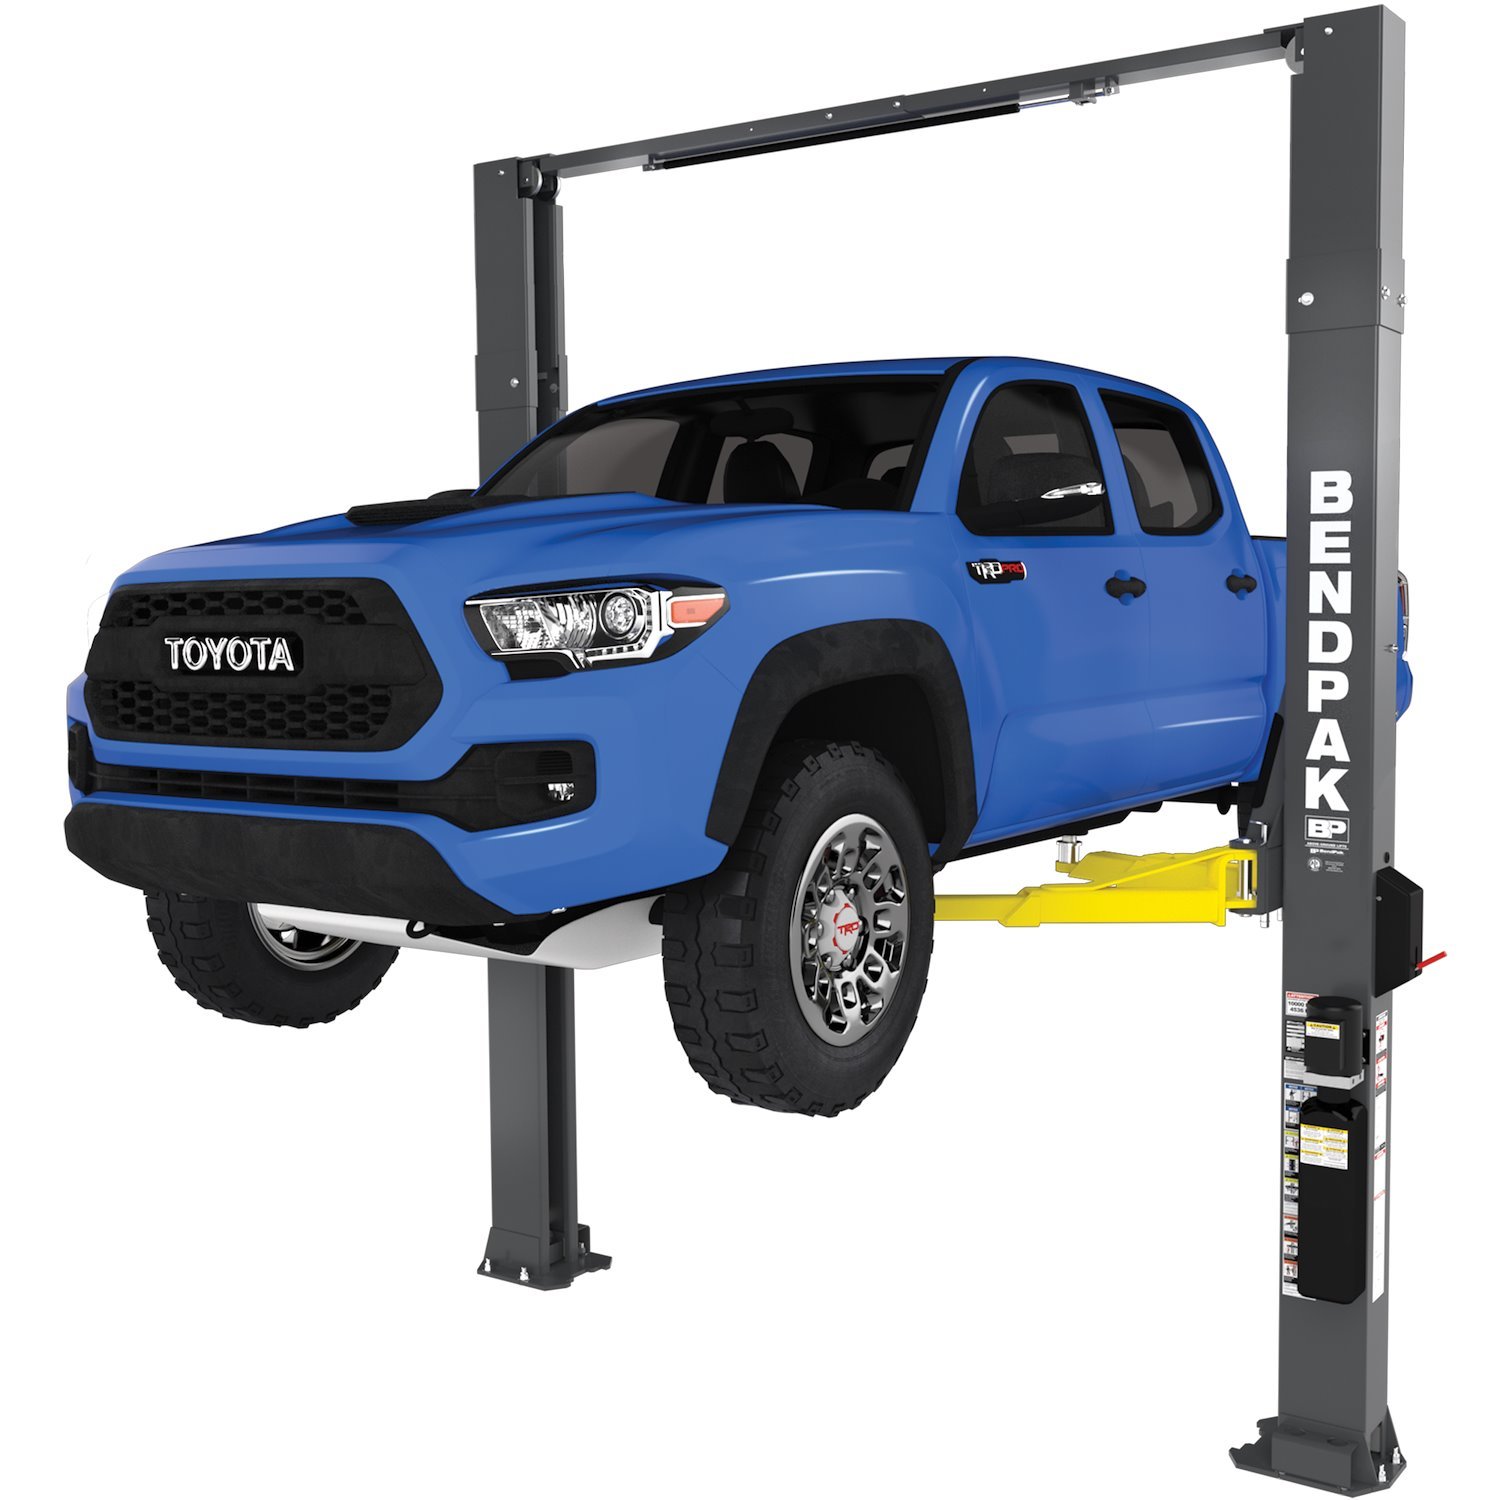 5175305 Two-Post Vehicle Lift, 10,000 lbs. Capacity, 69 in. Max Rise